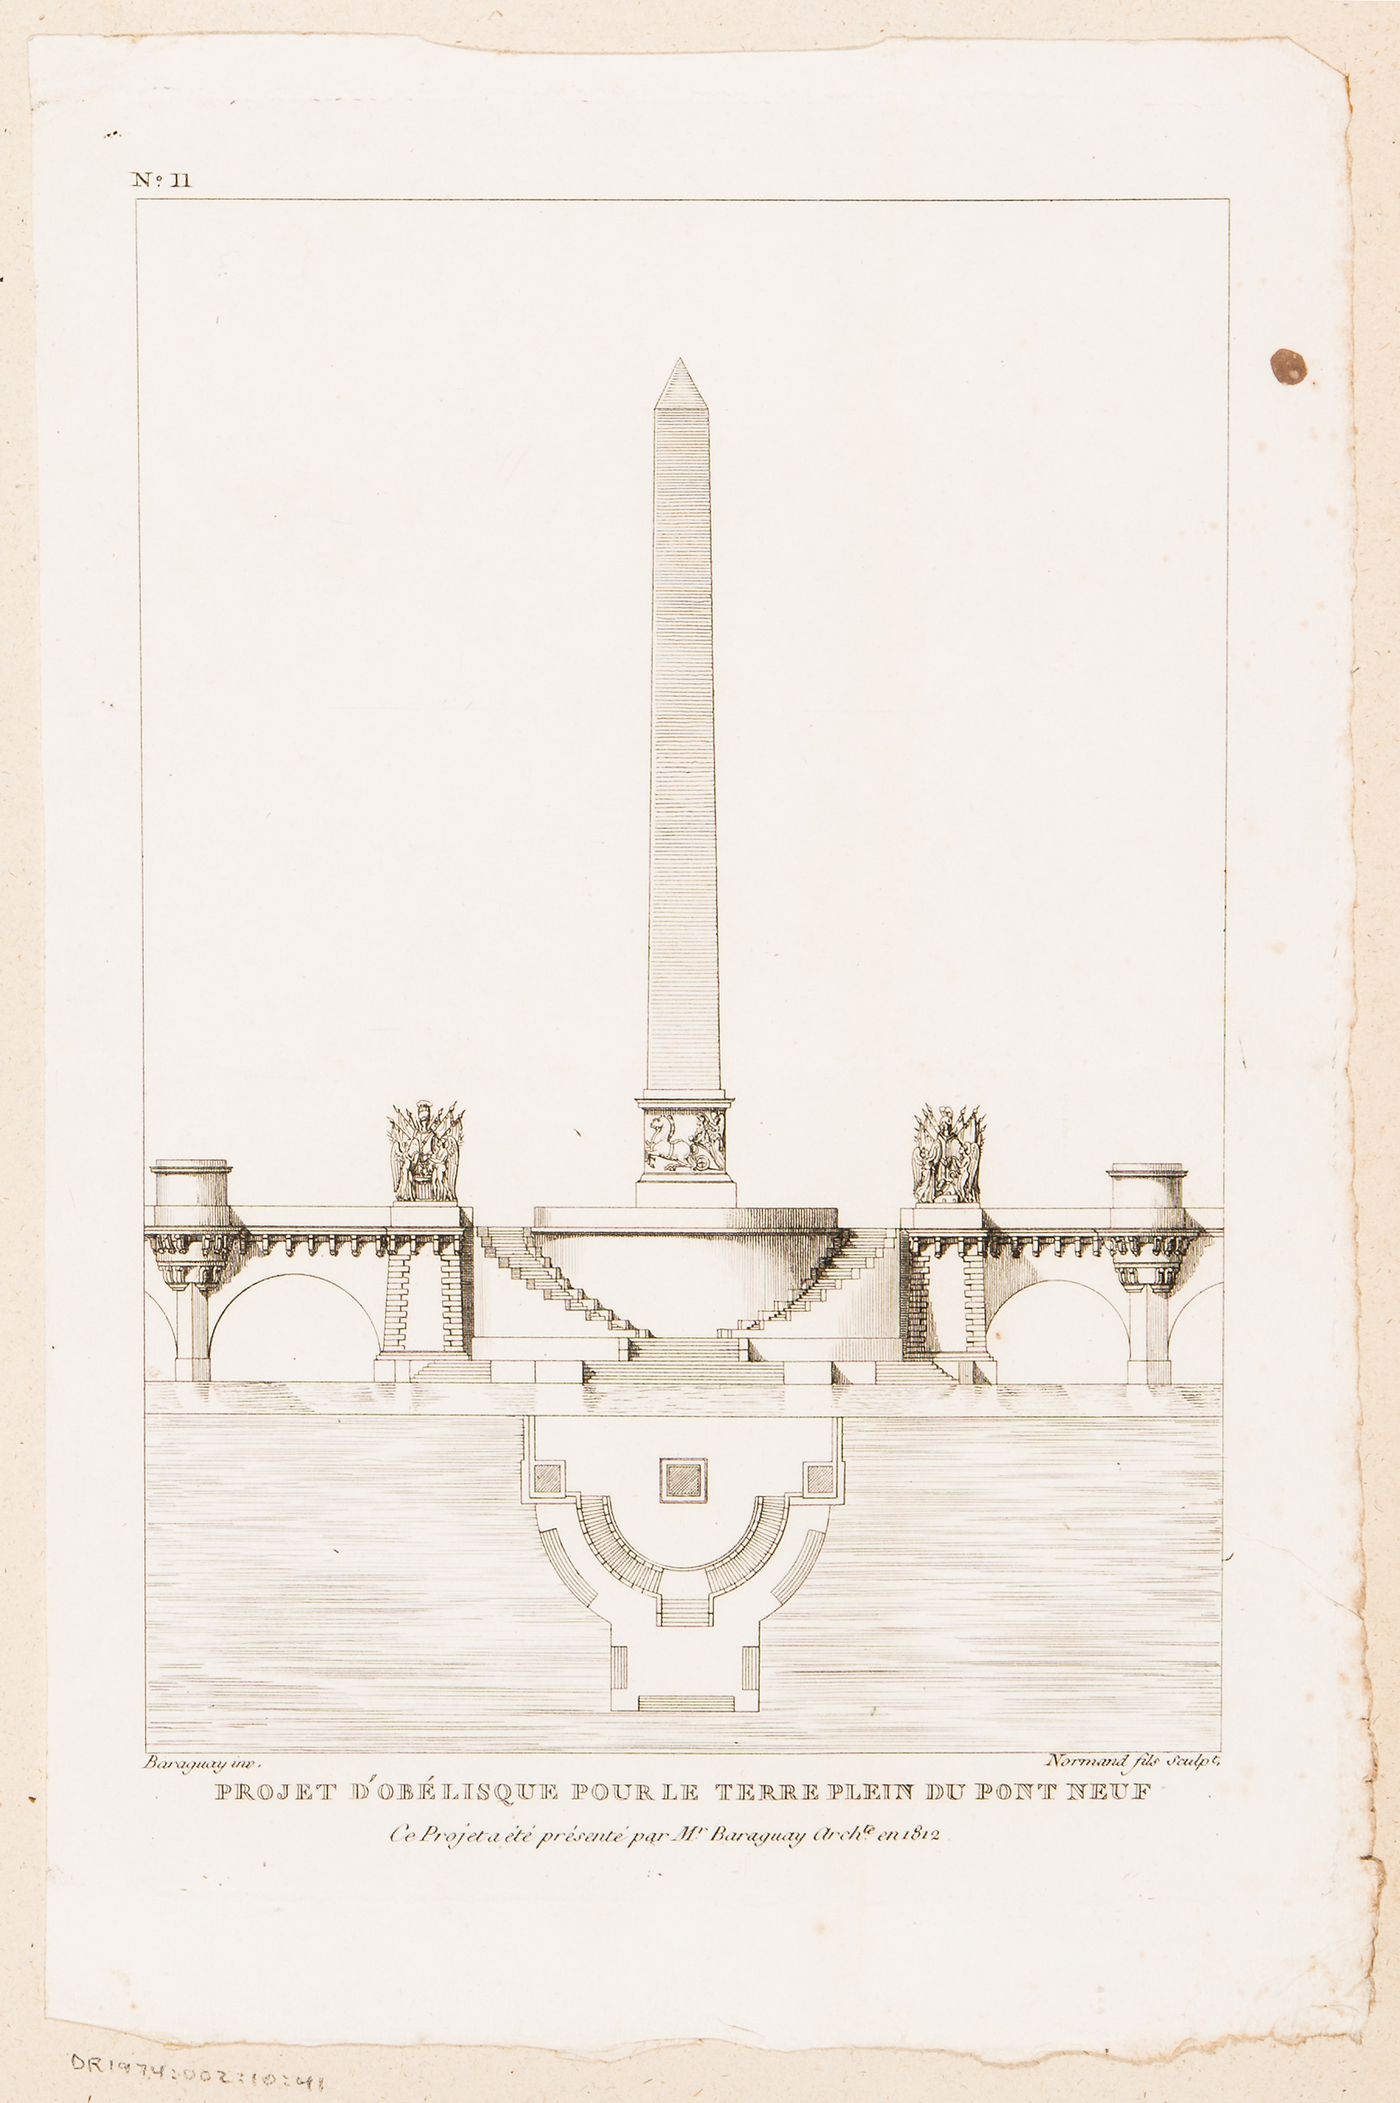 Competition entry by Thomas Pierre Baraguay for an obelisk for the central meridian of Pont-Neuf, Paris: Elevation and plan